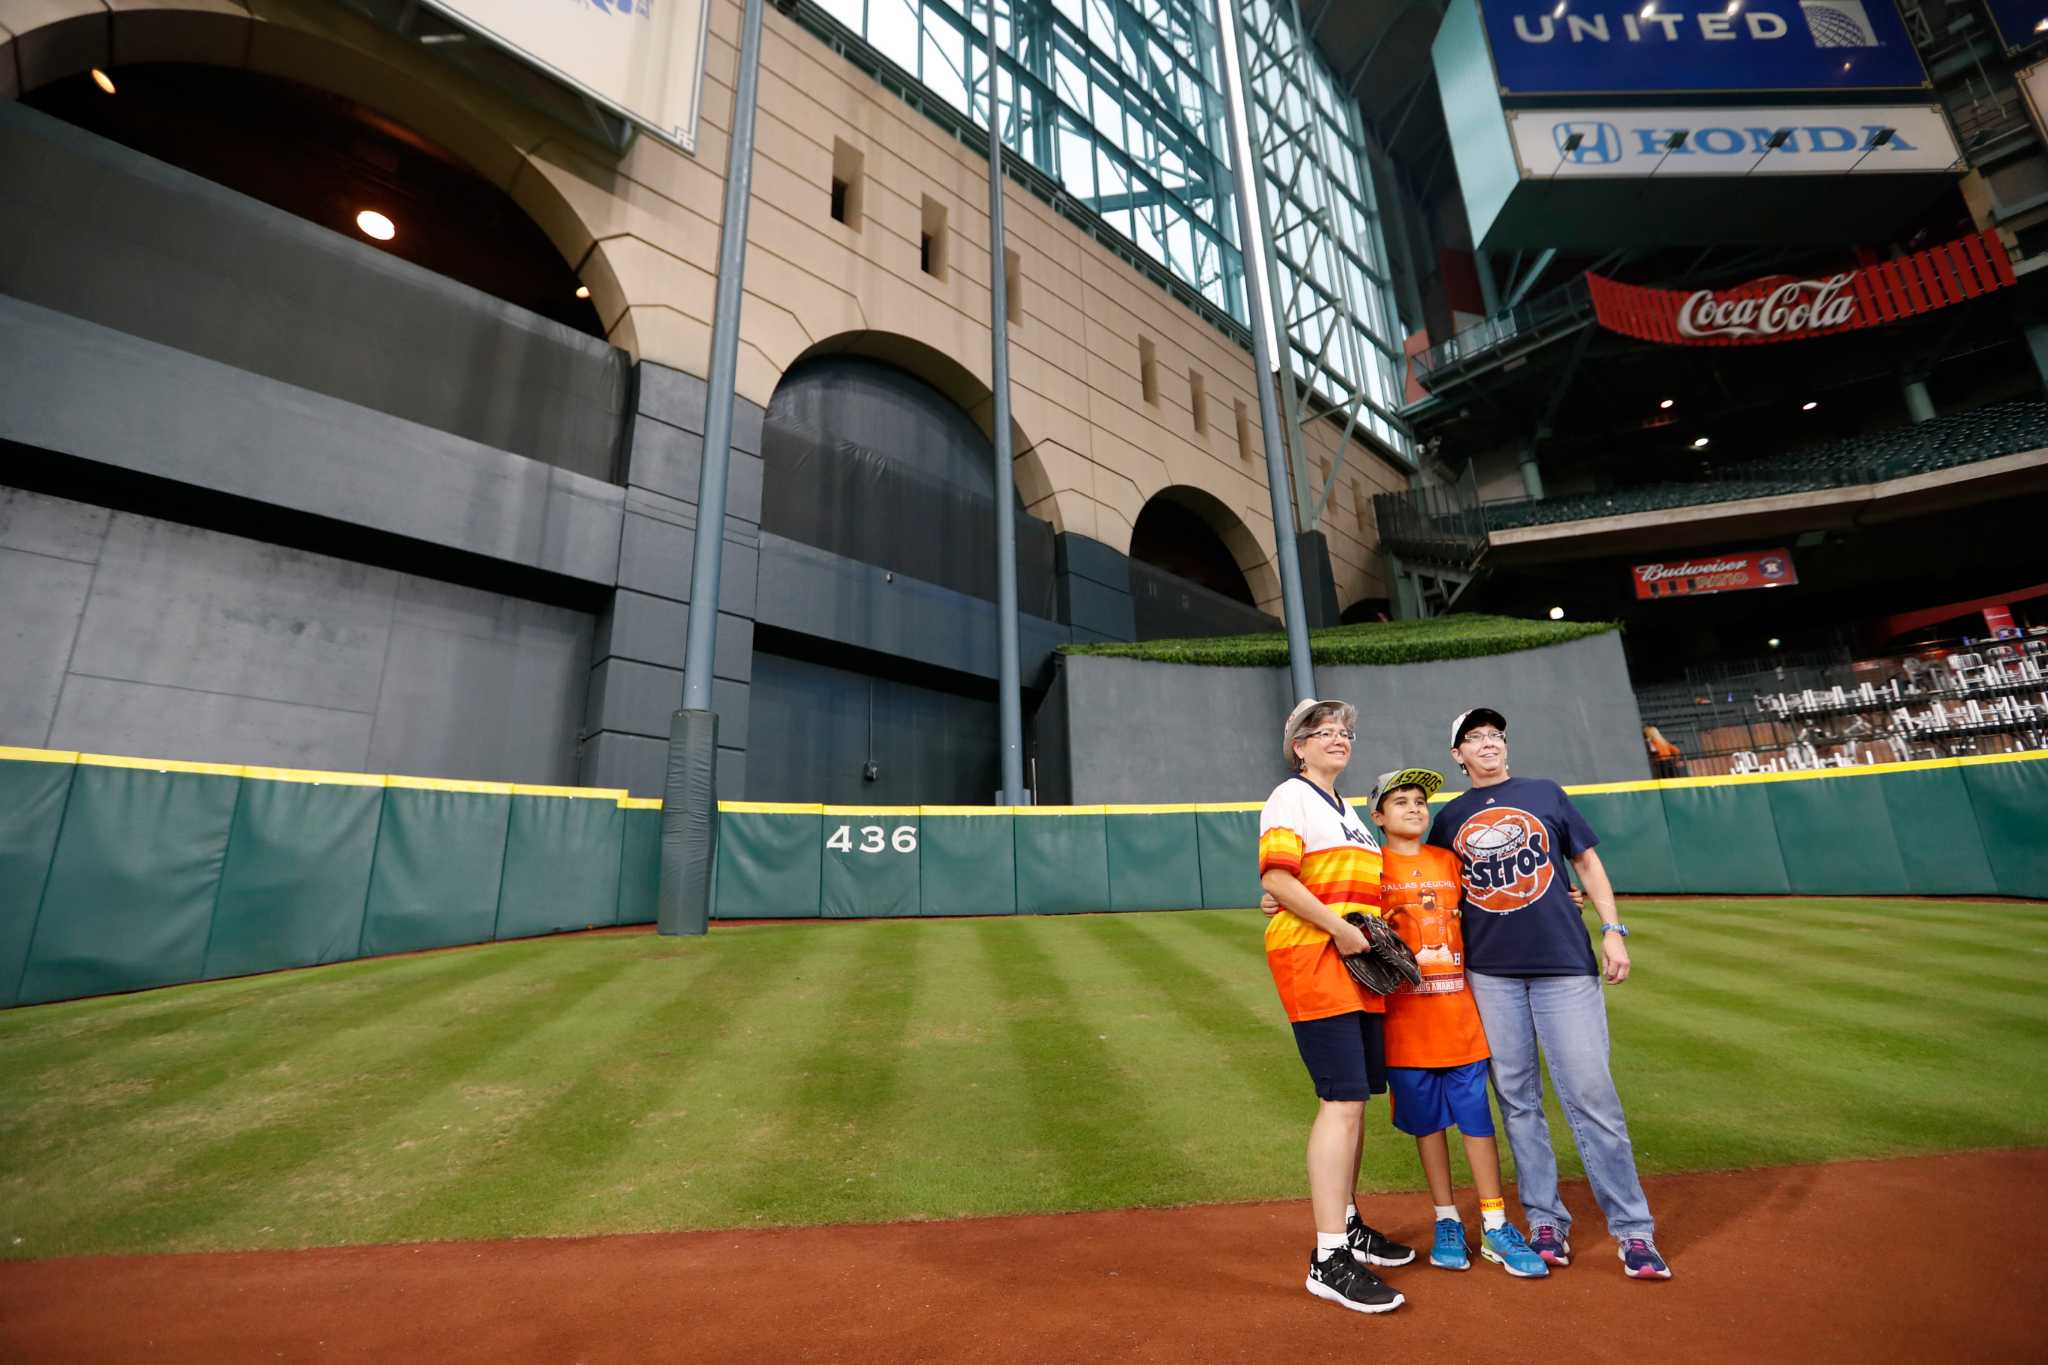 Houston Astros to do away with ridiculous hill in center field